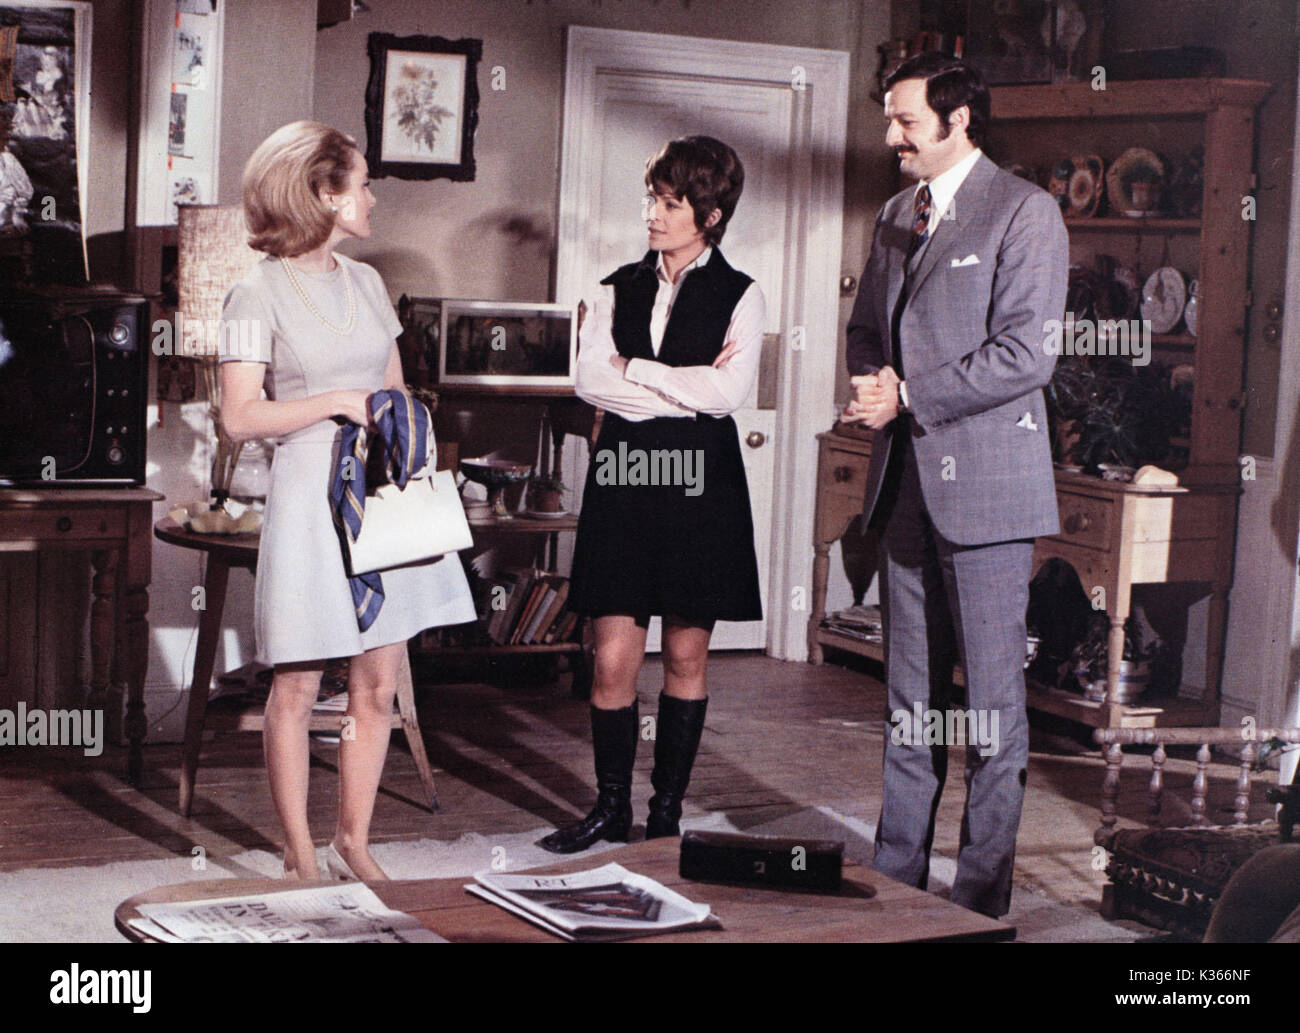 A DAY IN THE DEATH OF JOE EGG SHEILA GISH, JANET SUZMAN AND PETER BOWLES A DOMINO PRODUCTION DISTRIBUTED BY COLUMBIA PICTURES     Date: 1972 Stock Photo